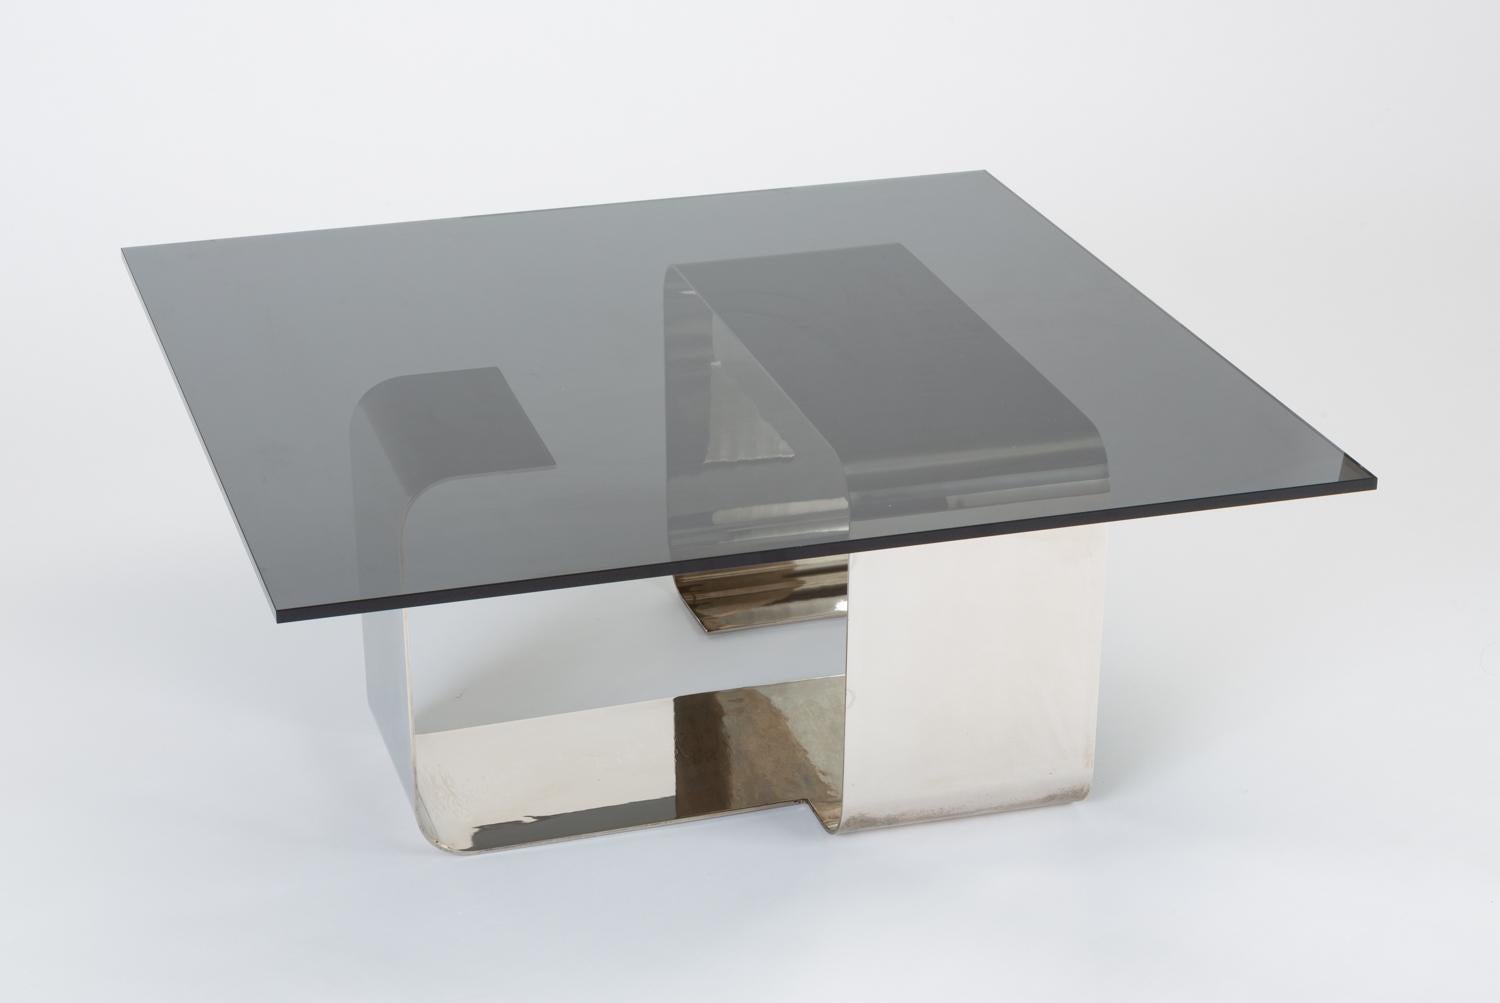 Stainless Steel Polished Steel and Smoked Glass Coffee Table by François Monnet for Kappa